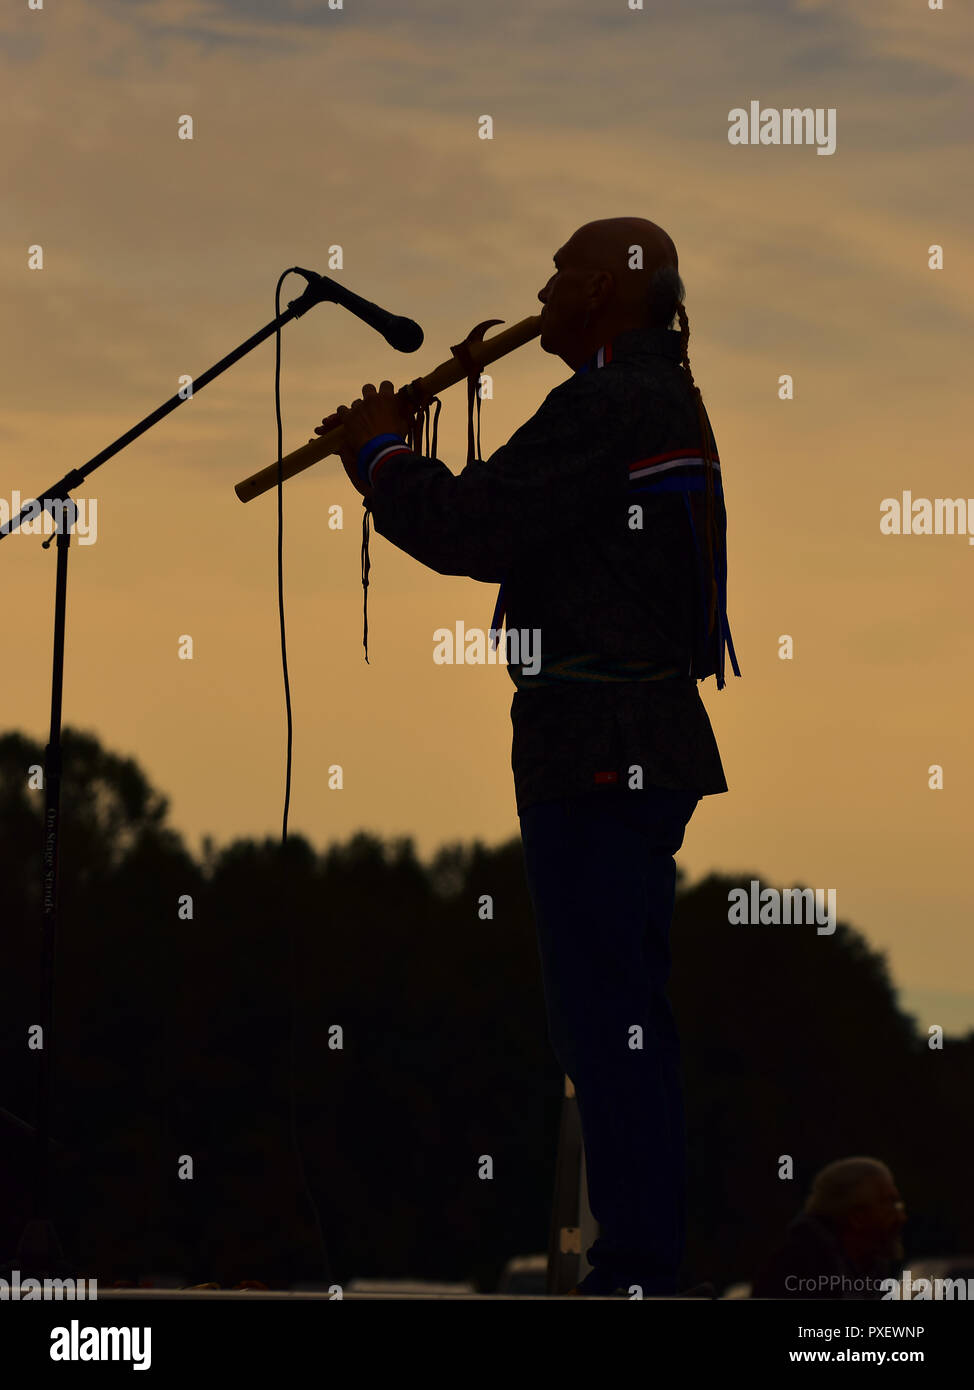 Silhouette of Native American play flute at sunset Stock Photo